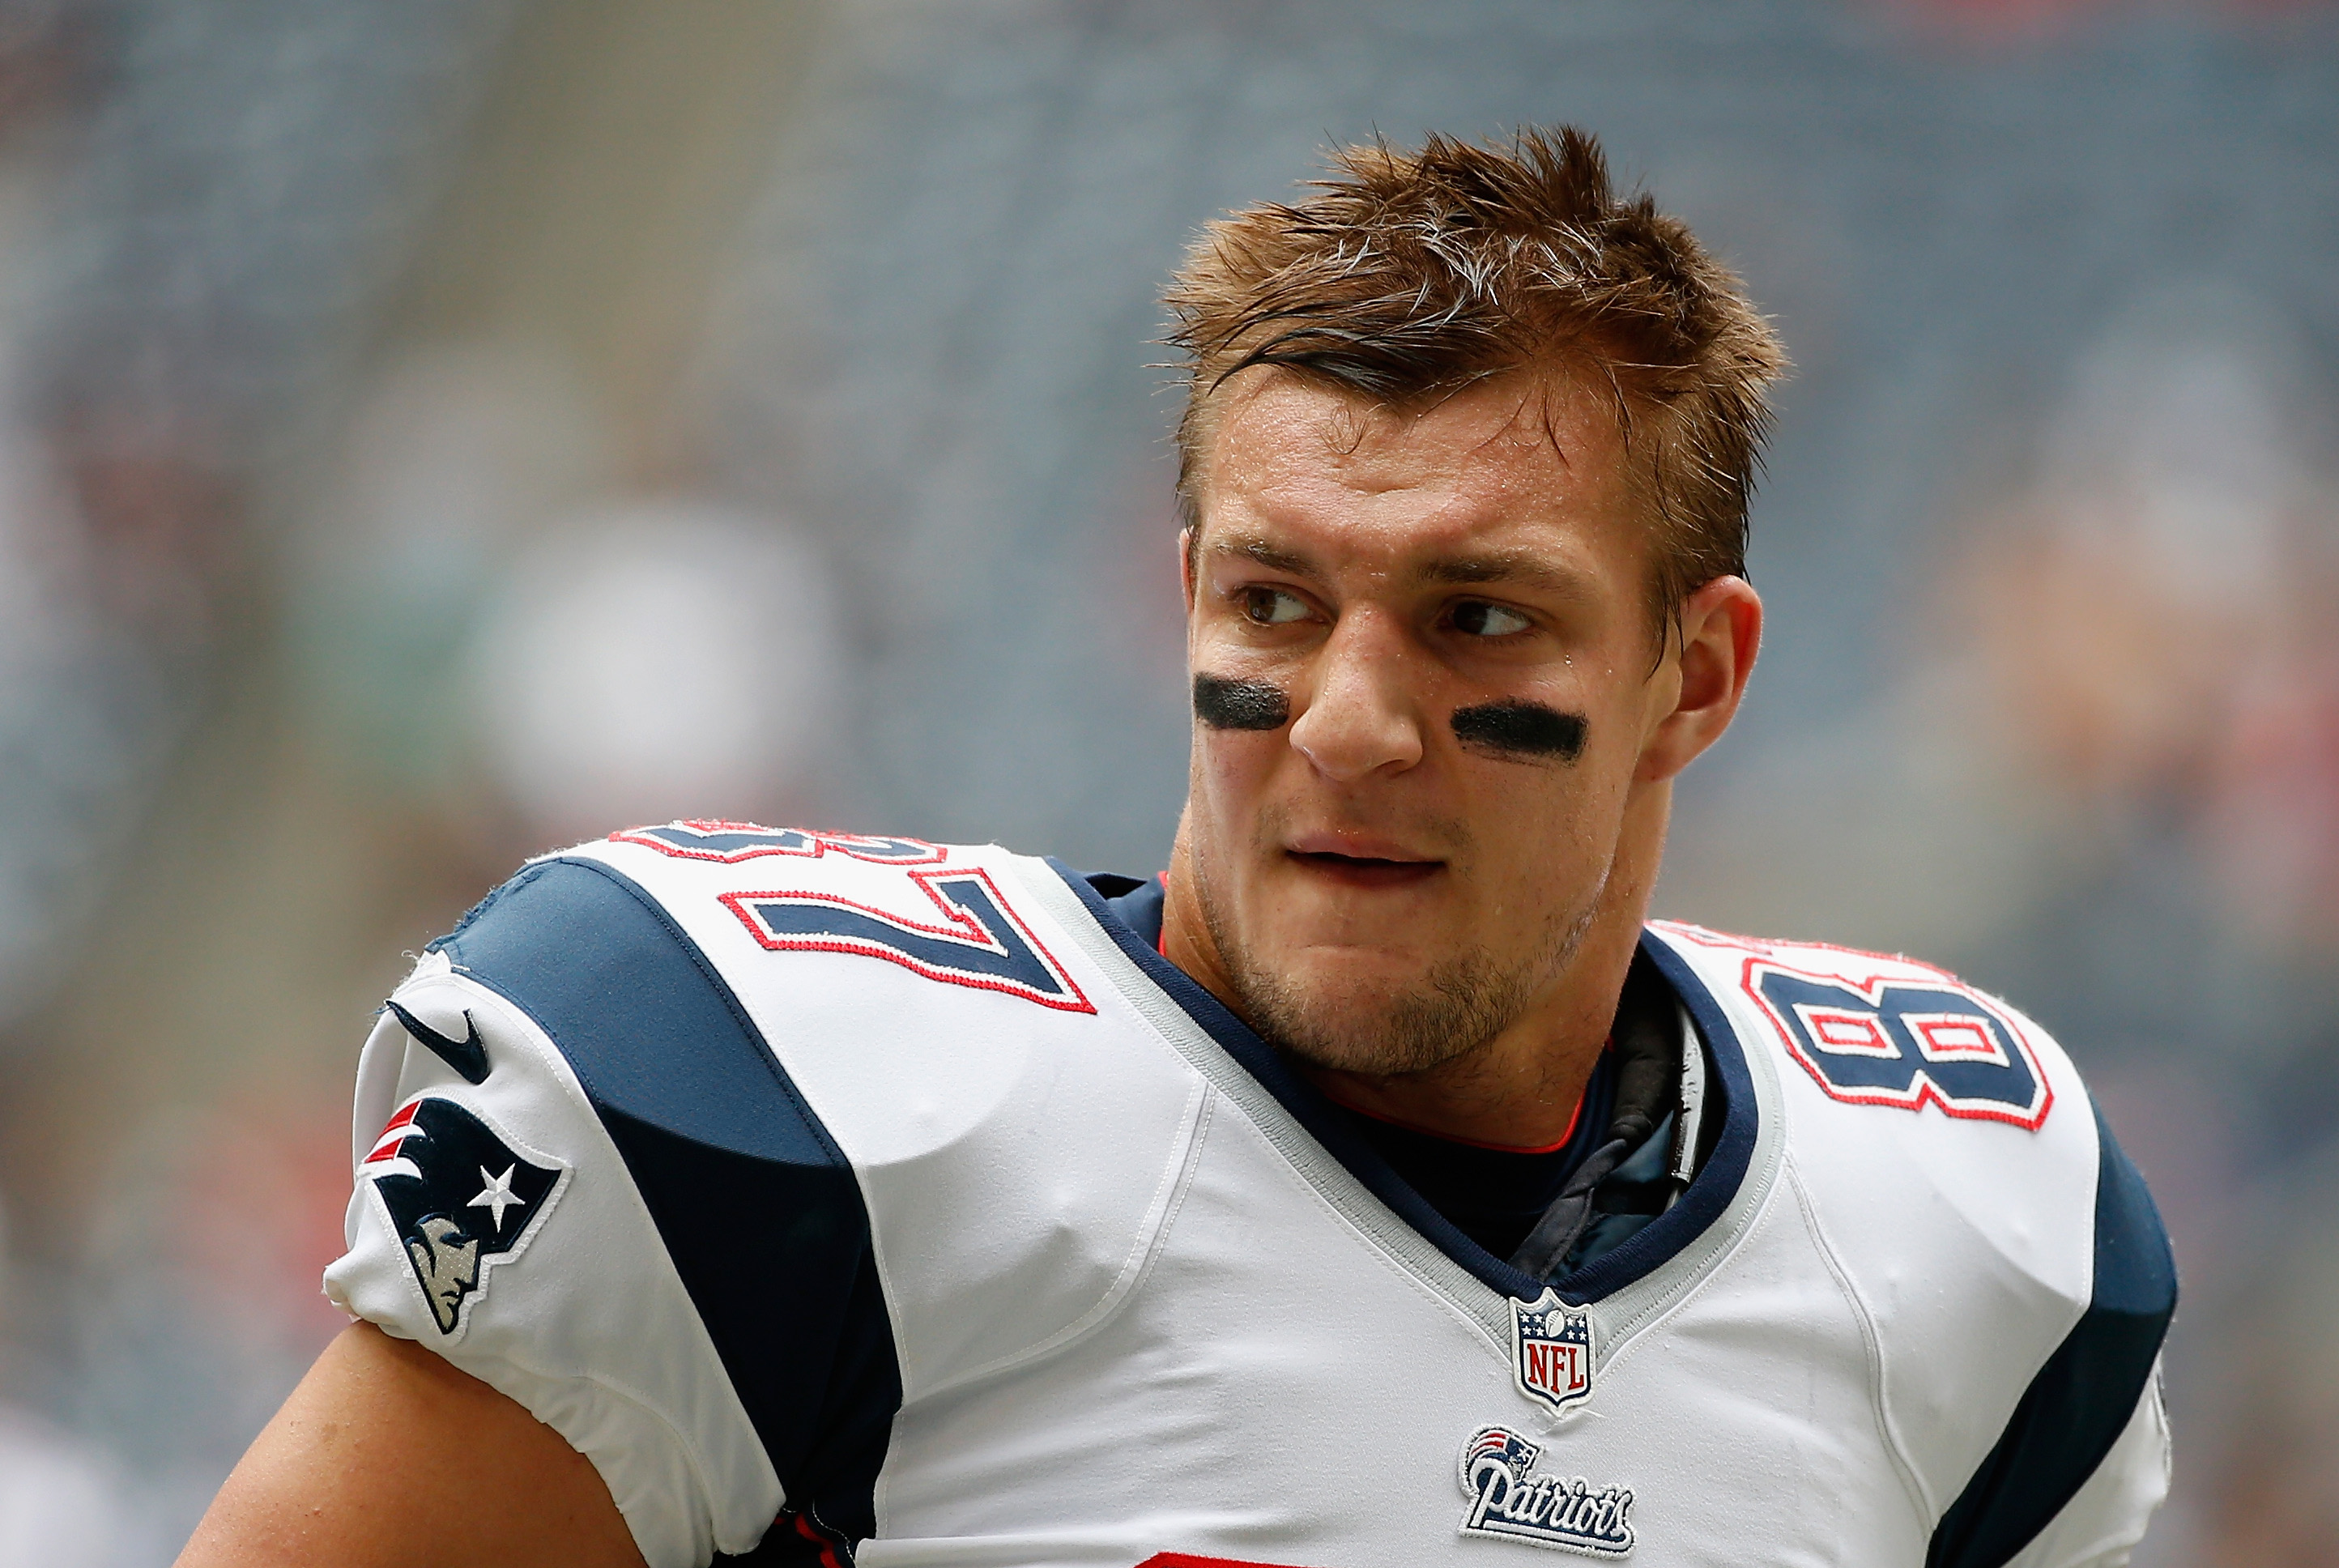 former nfl star rob gronkowski backs california's proposed ban on youth tackle football: 'it's fair'